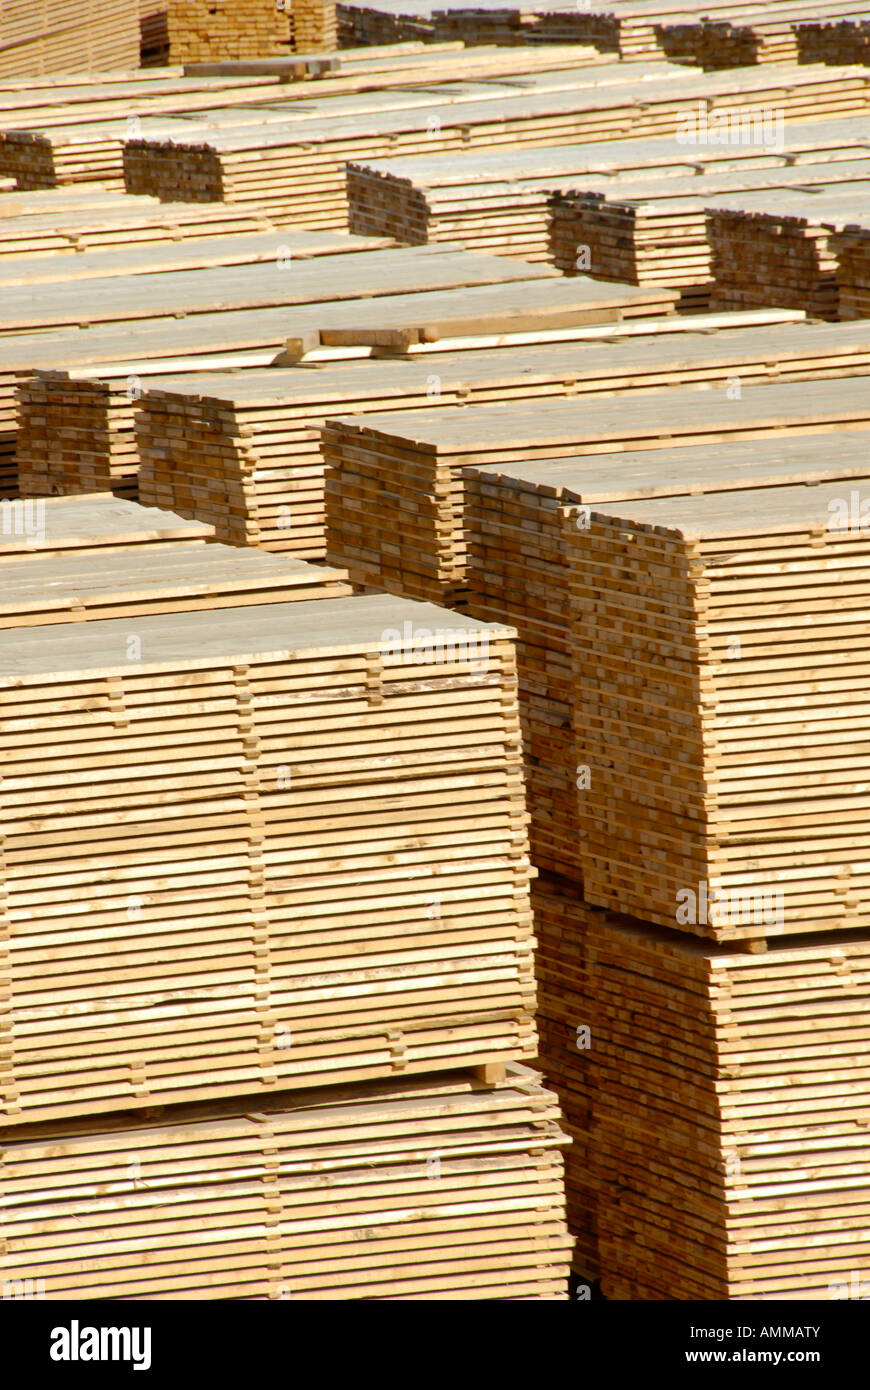 Stacked Lumber Forestry Logging Wood Industry Quesnel British Columbia BC Canada Stock Photo